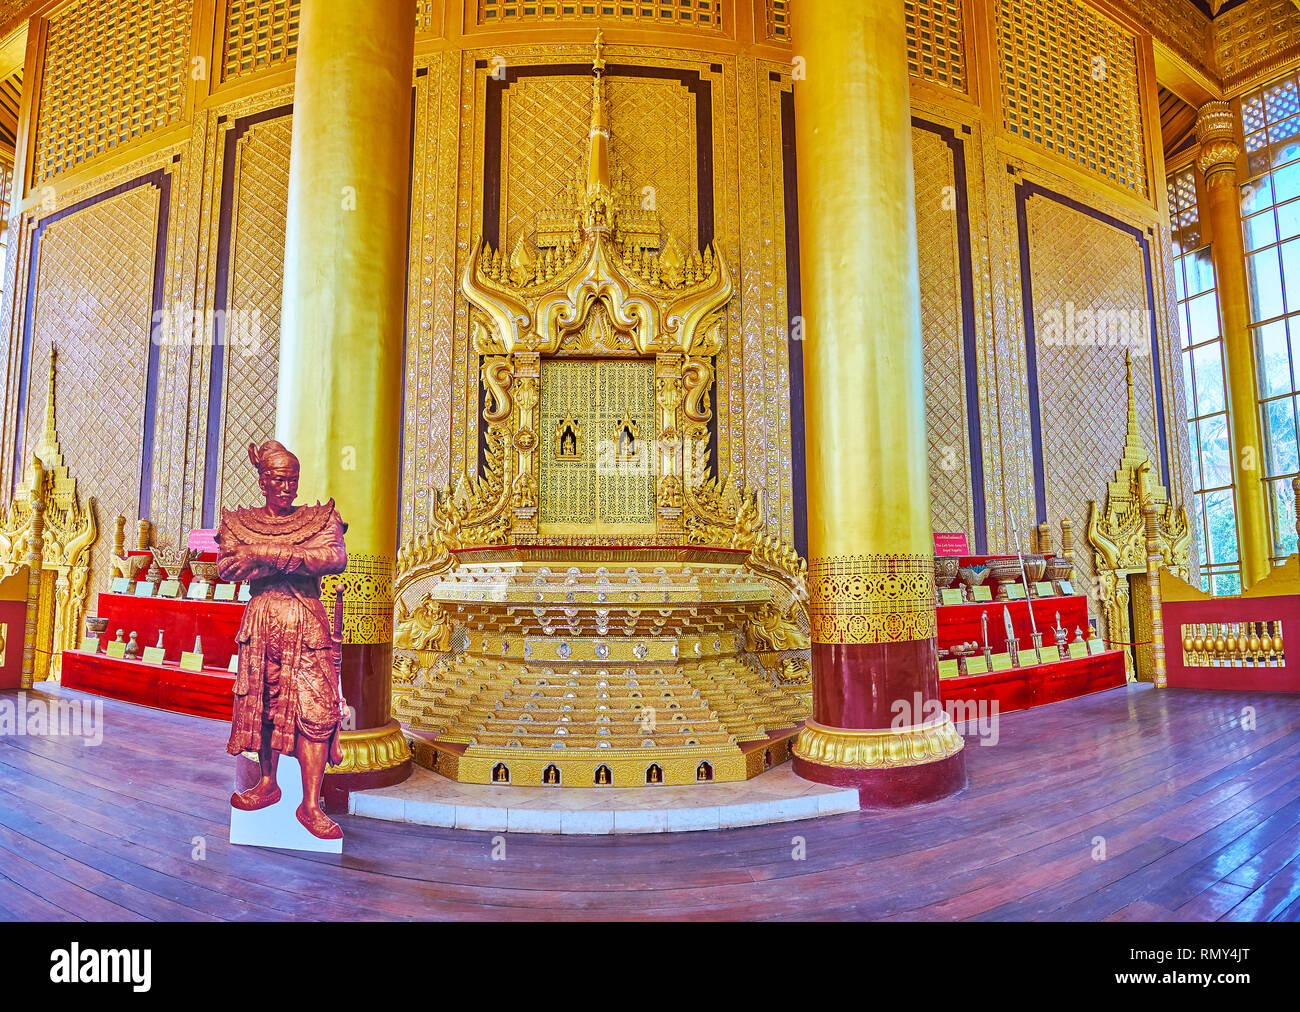 BAGO, MYANMAR - FEBRUARY 15, 2018: The complex decoration of Thihathana (Lion) Trone with carved patterns, sculptures and mirrorwork, Great Audience H Stock Photo